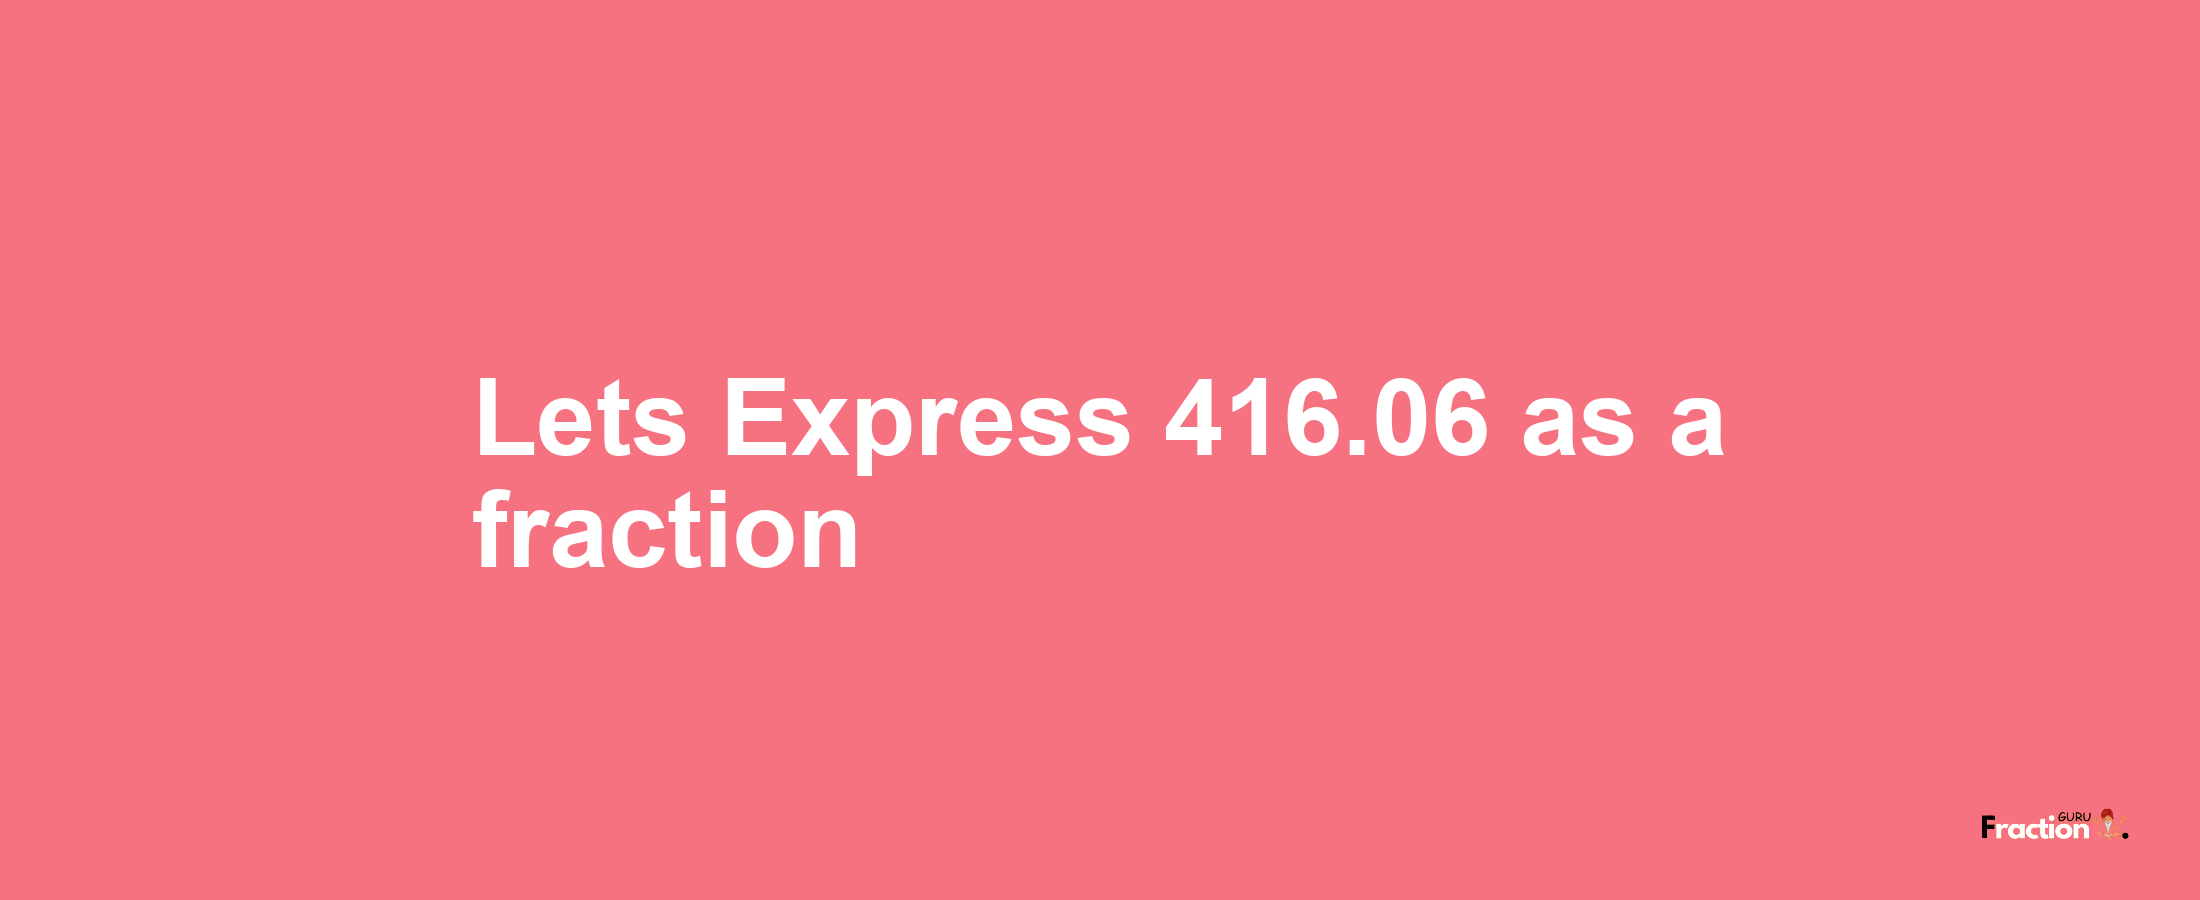 Lets Express 416.06 as afraction